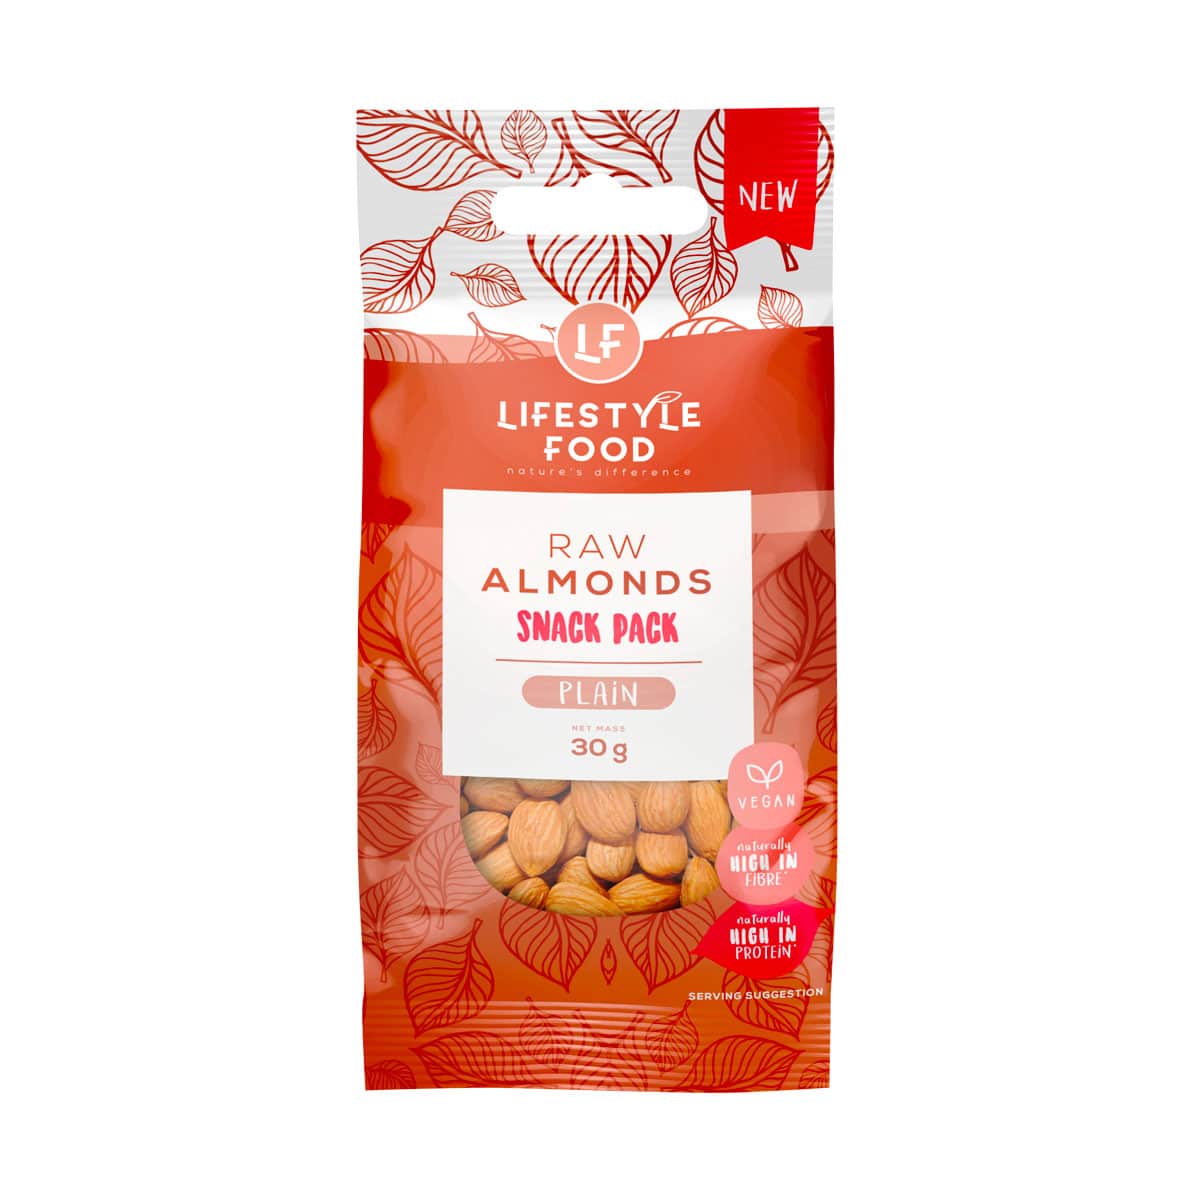 Lifestyle Food Almond Snack Pack Plain - 30g